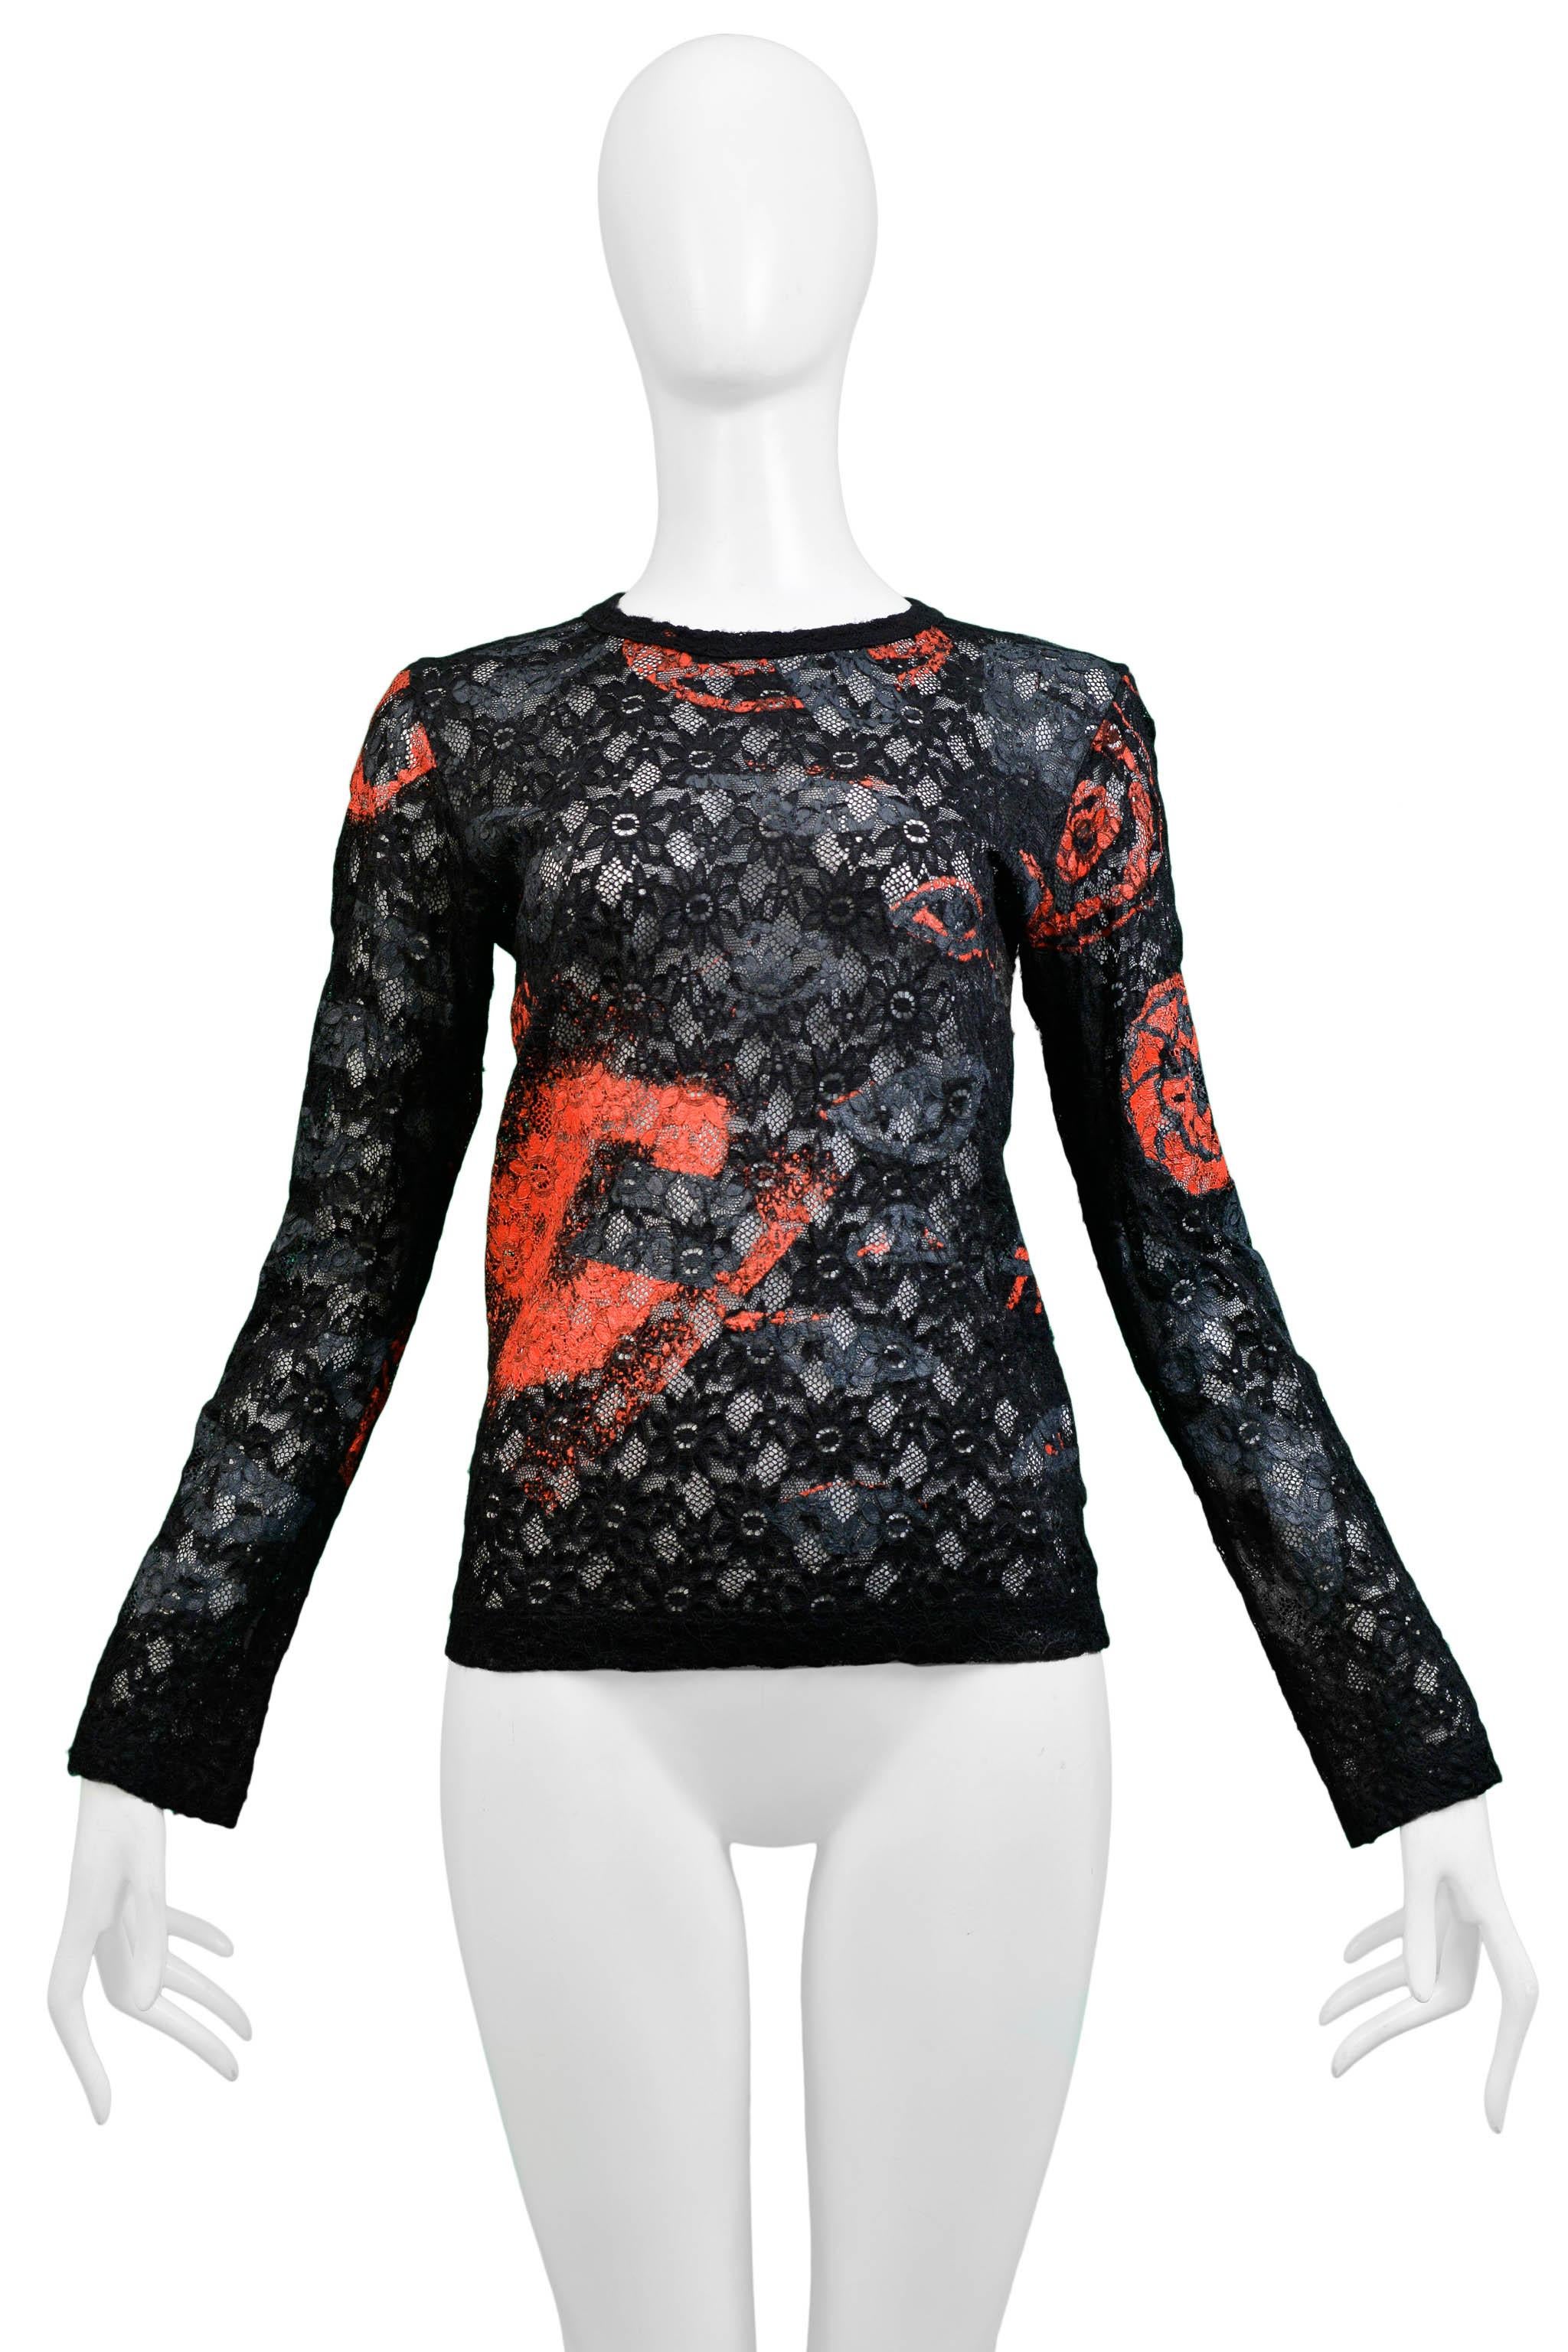 Resurrection Vintage is excited to offer a vintage Comme des Garcons black stretch lace top featuring a high collar, long sleeves, and red, black, and grey screenprint on lace. 

Comme Des Garcons
Size Small
2000 Collection
Stretch Lace
Excellent